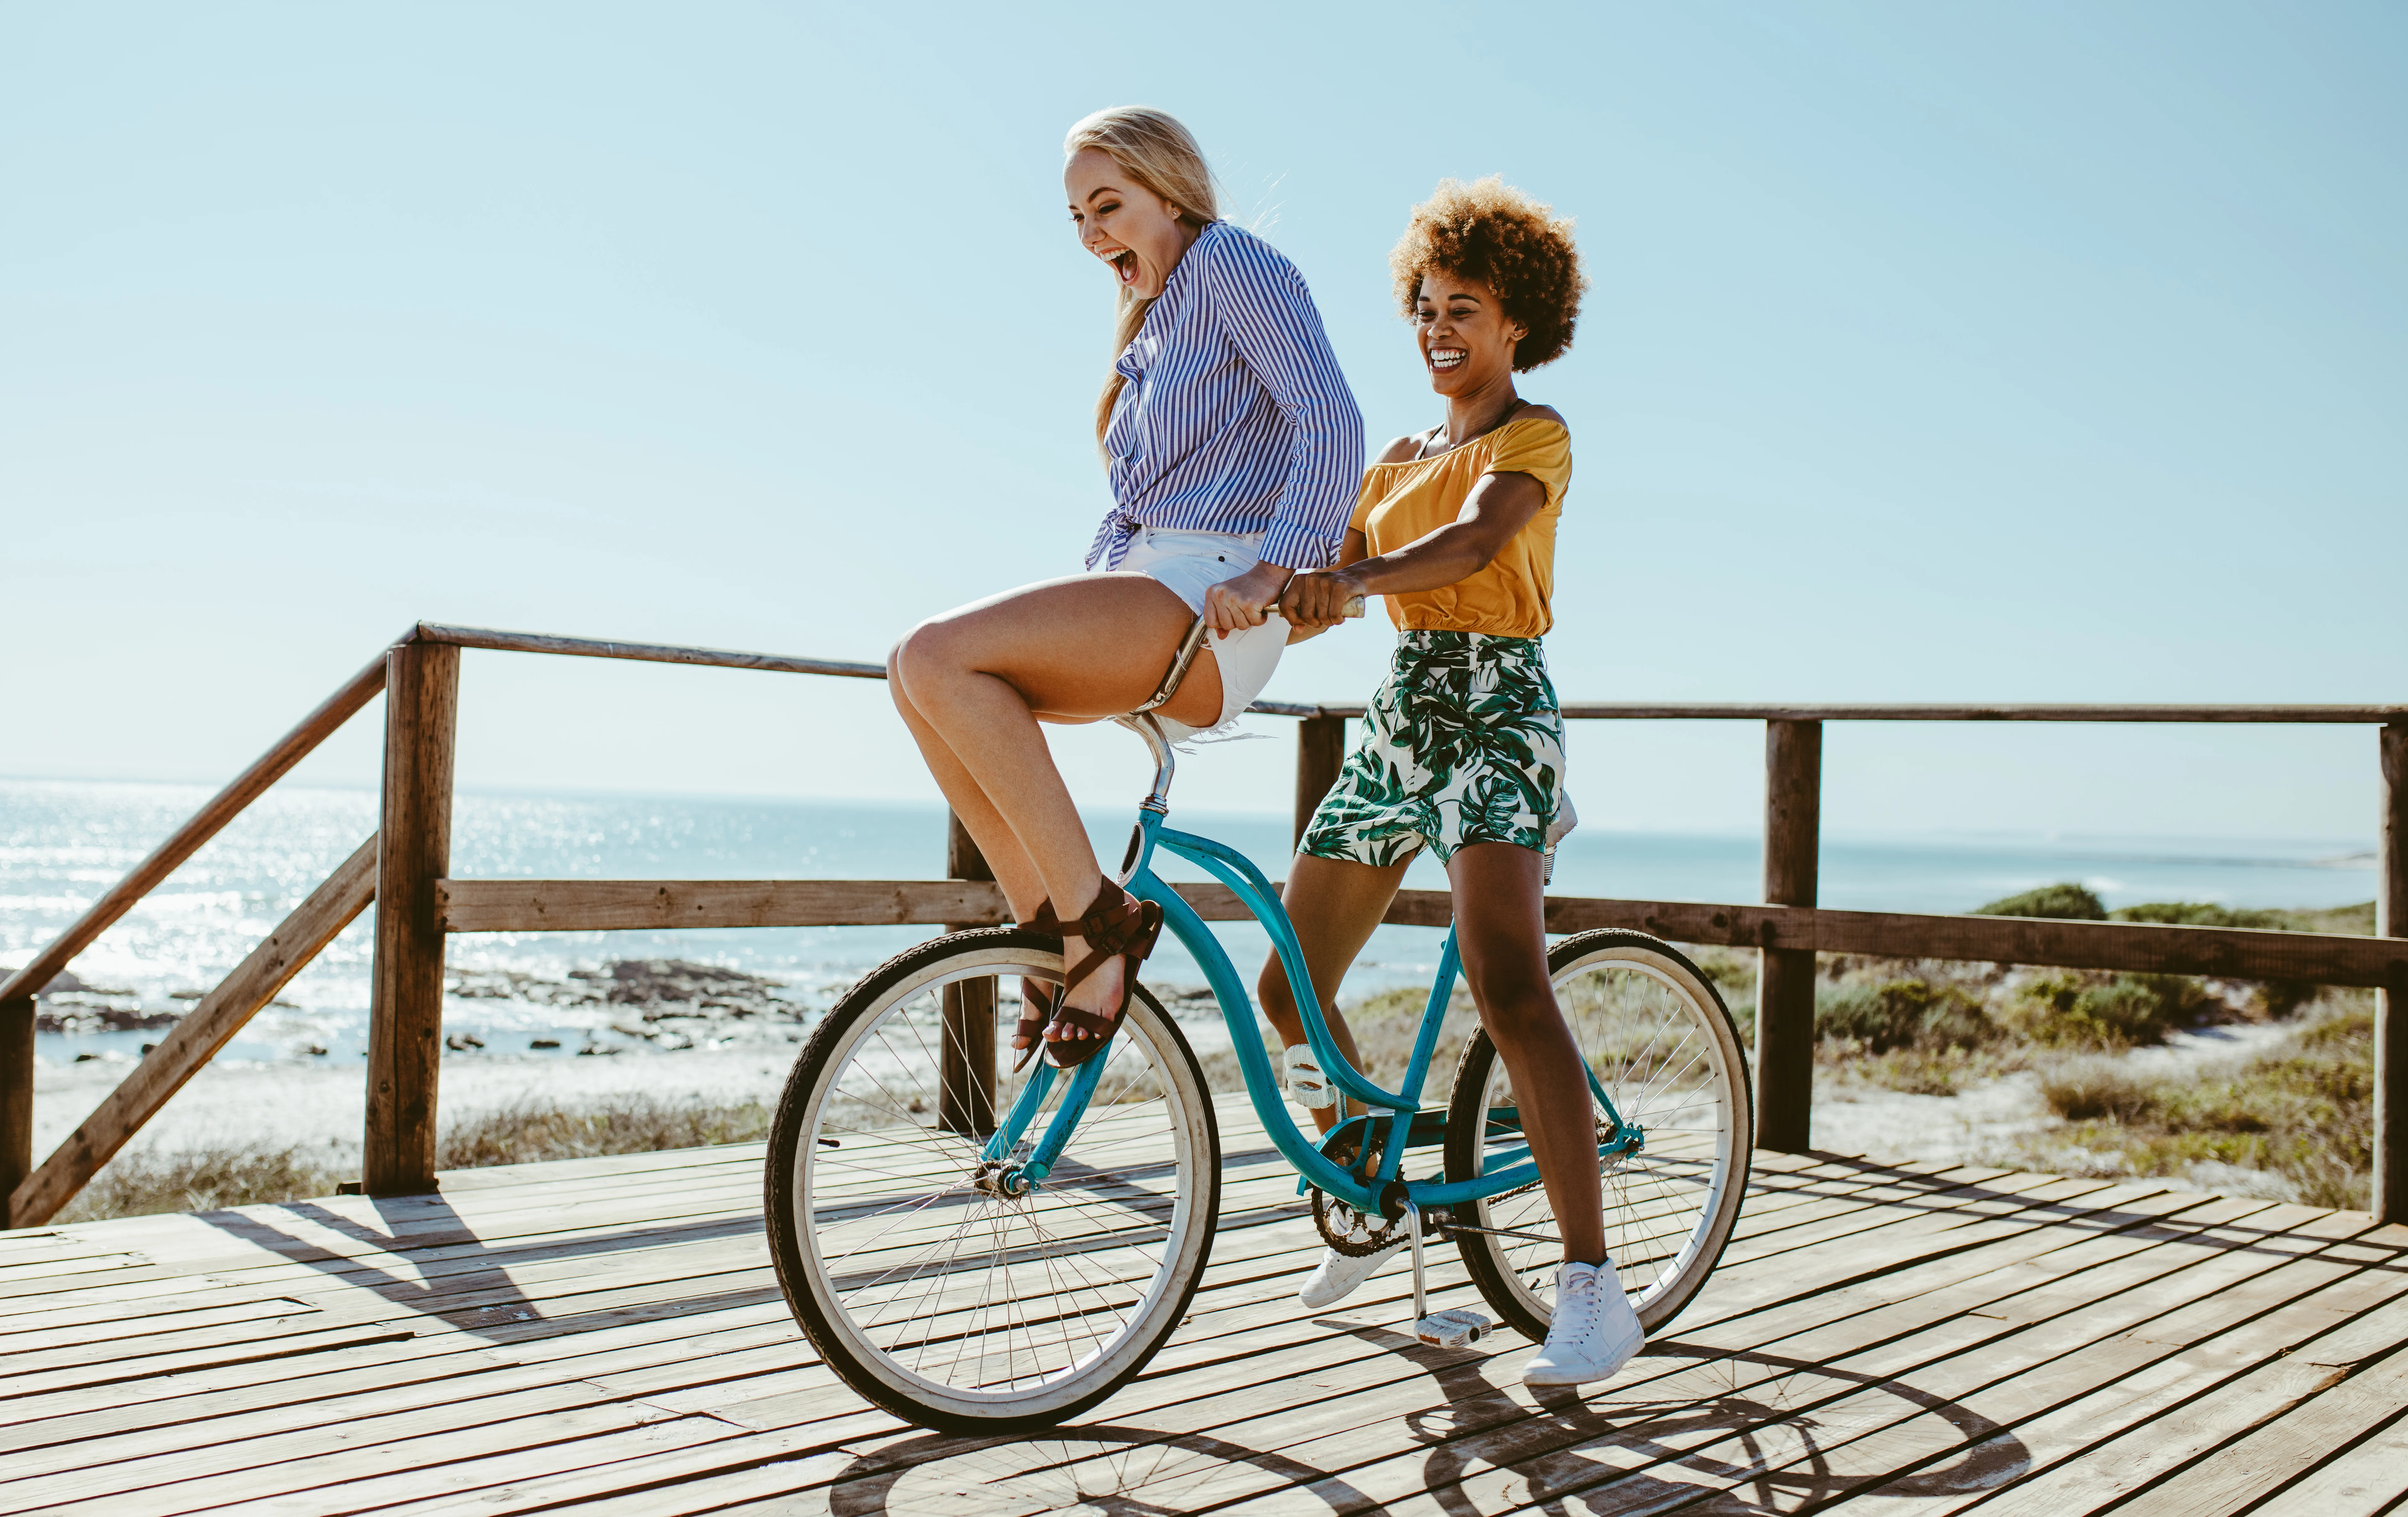 Two women riding one bicycle